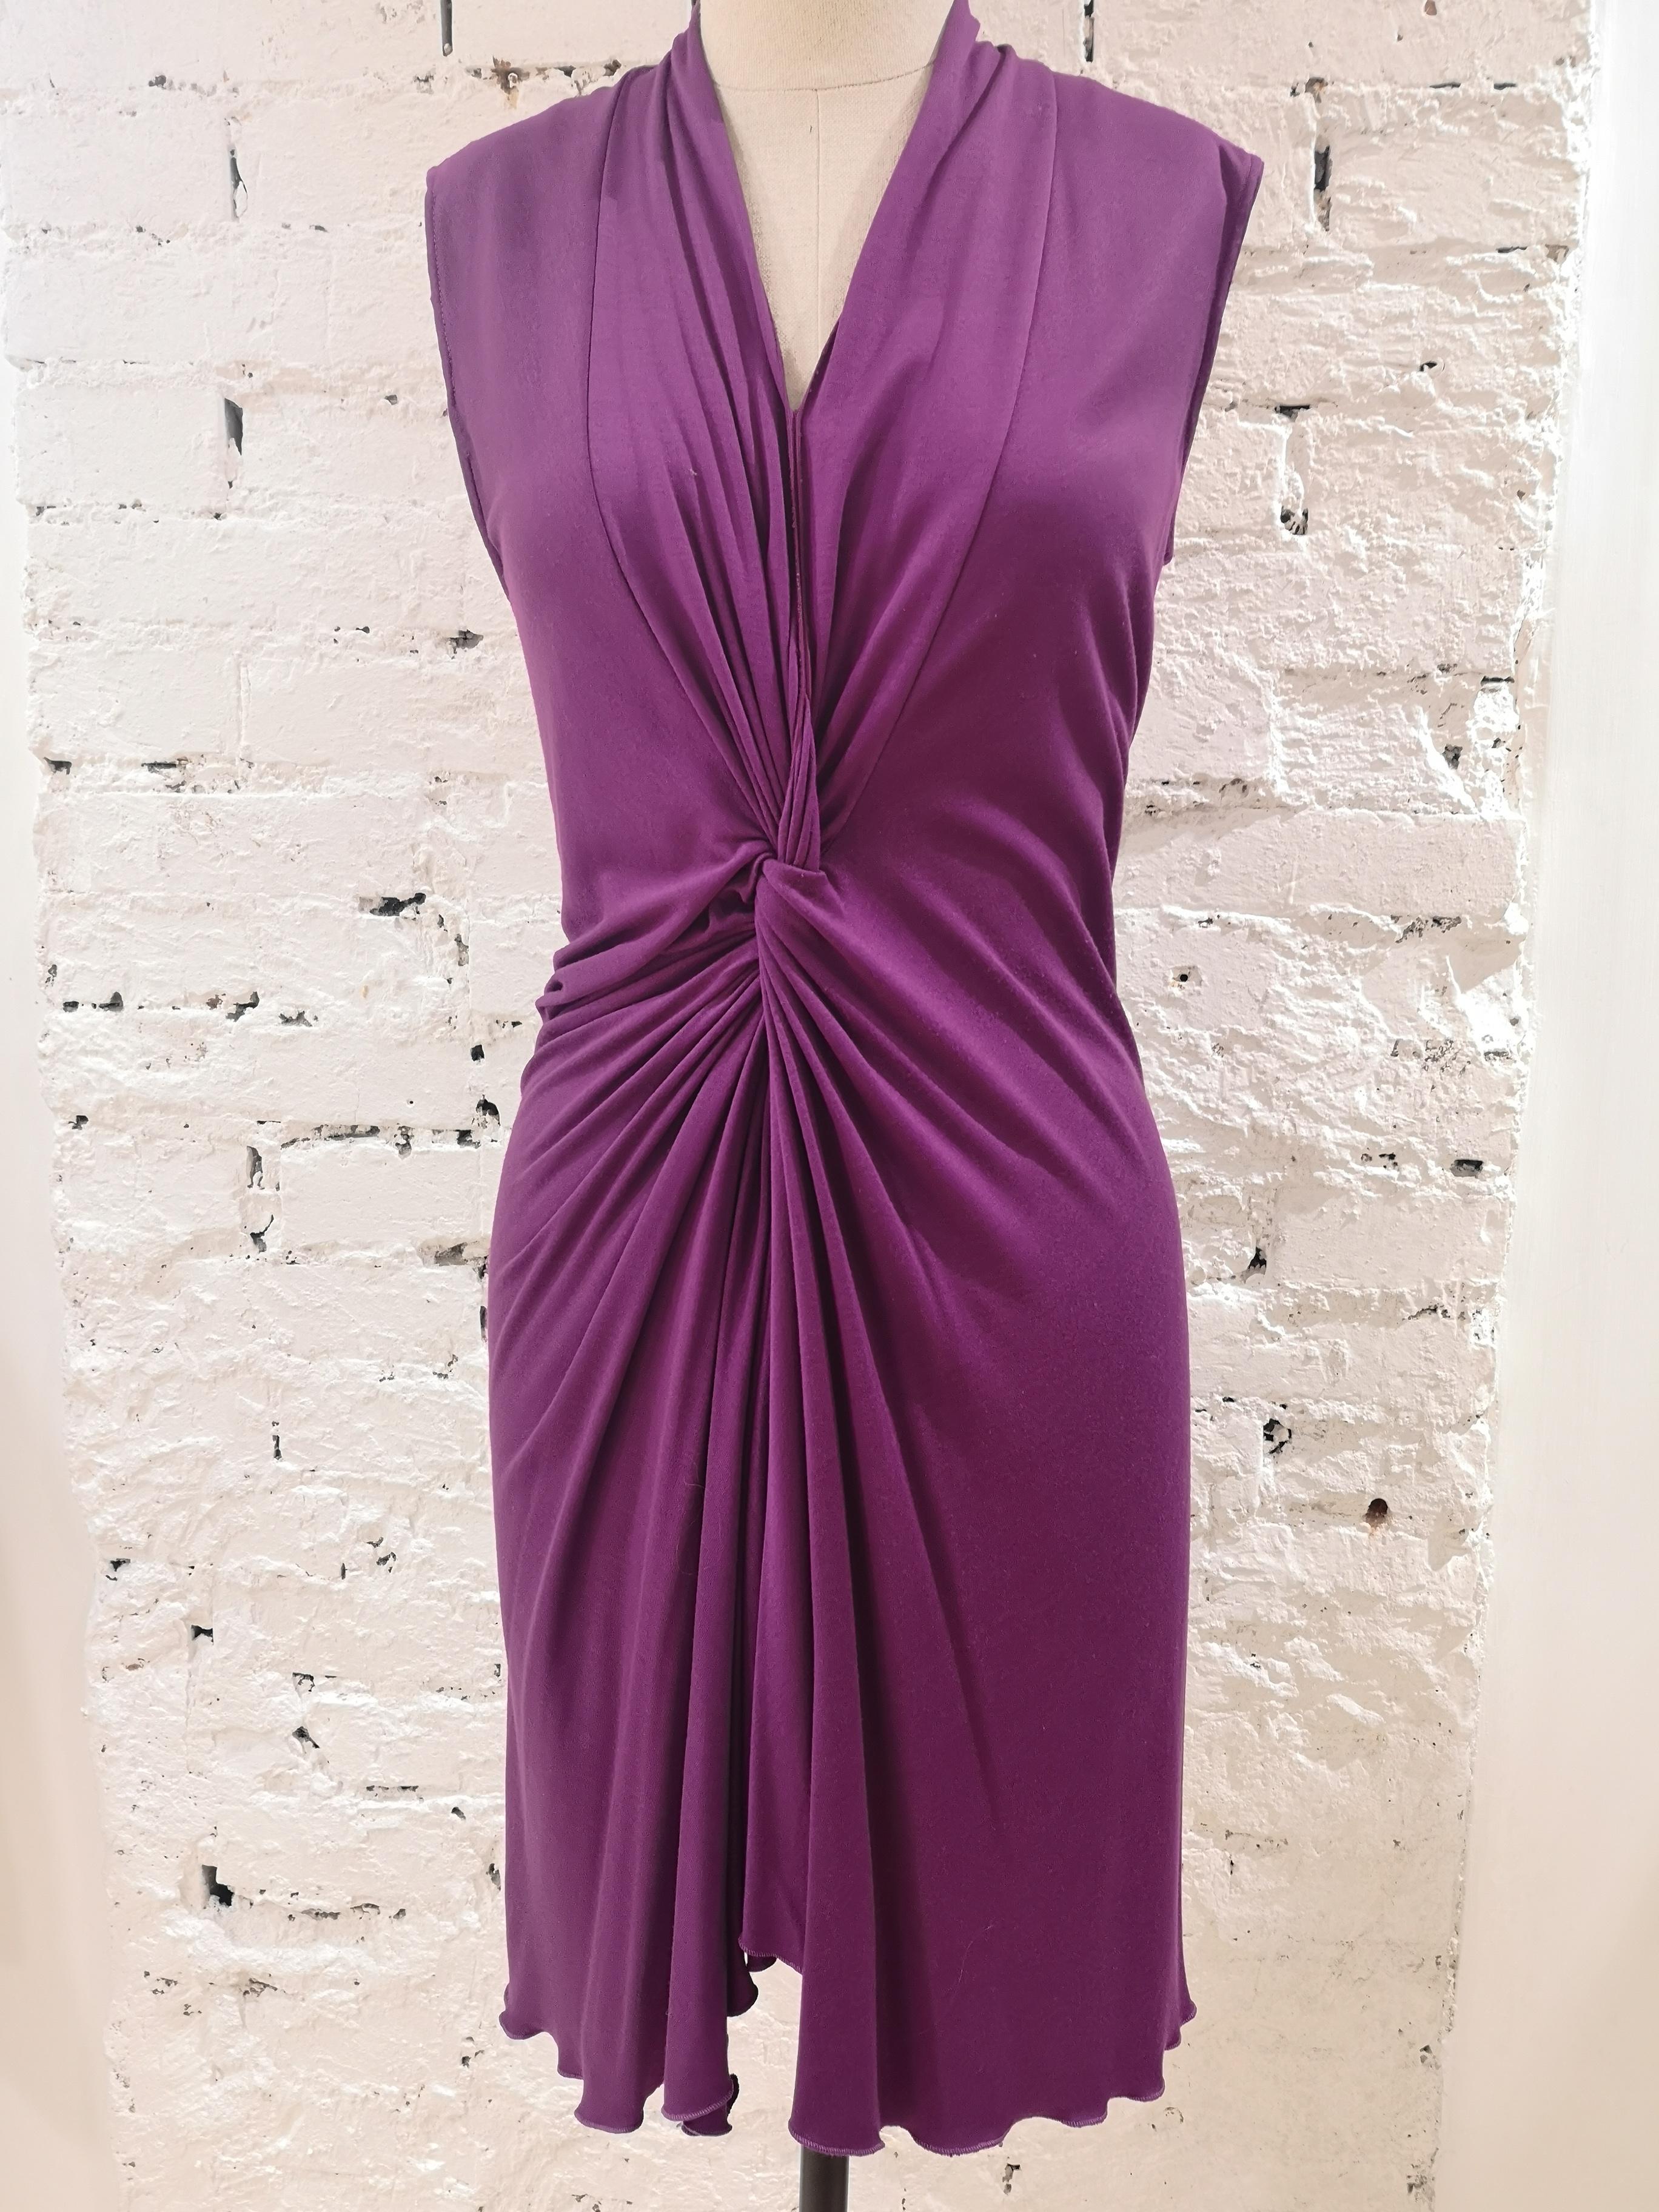 Yves Saint Laurent purple Dress
viscose dress totally made in italy in size 36 FR = 40 it
total lenght 97 cm